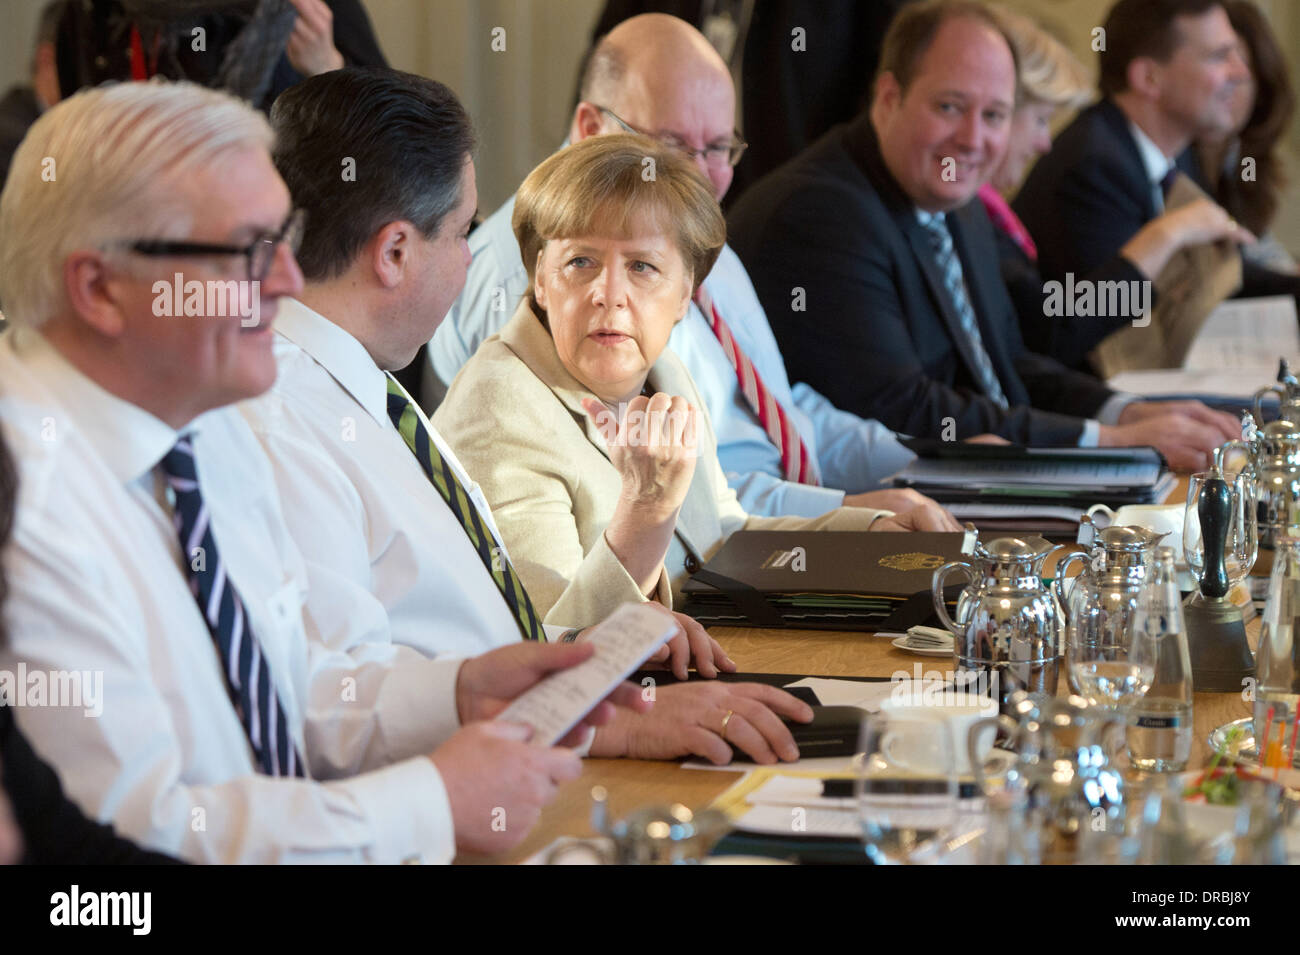 Federal Foreign Minister Frank-Walter Steinmeier (SPD, L-R), Federal Economy Minister Sigmar Gabriel (SPD), Federal Chancellor Angela Merkel (CDU), head of the Federal Chancellery Peter Altmeier (CDU), state secretary Helge Braun, minister of state for culture and media Monika Gruetters (CDU), publicist Steffen Seibert and the minister of state for integration Aydan Ozoguz (SPD) participate at the conference of the cabinet in Meseberg, Germany, 23 January 2014. The German federal cabinet meets to discuss the further policy. Photo: Maurizio Gambarini/dpa Stock Photo